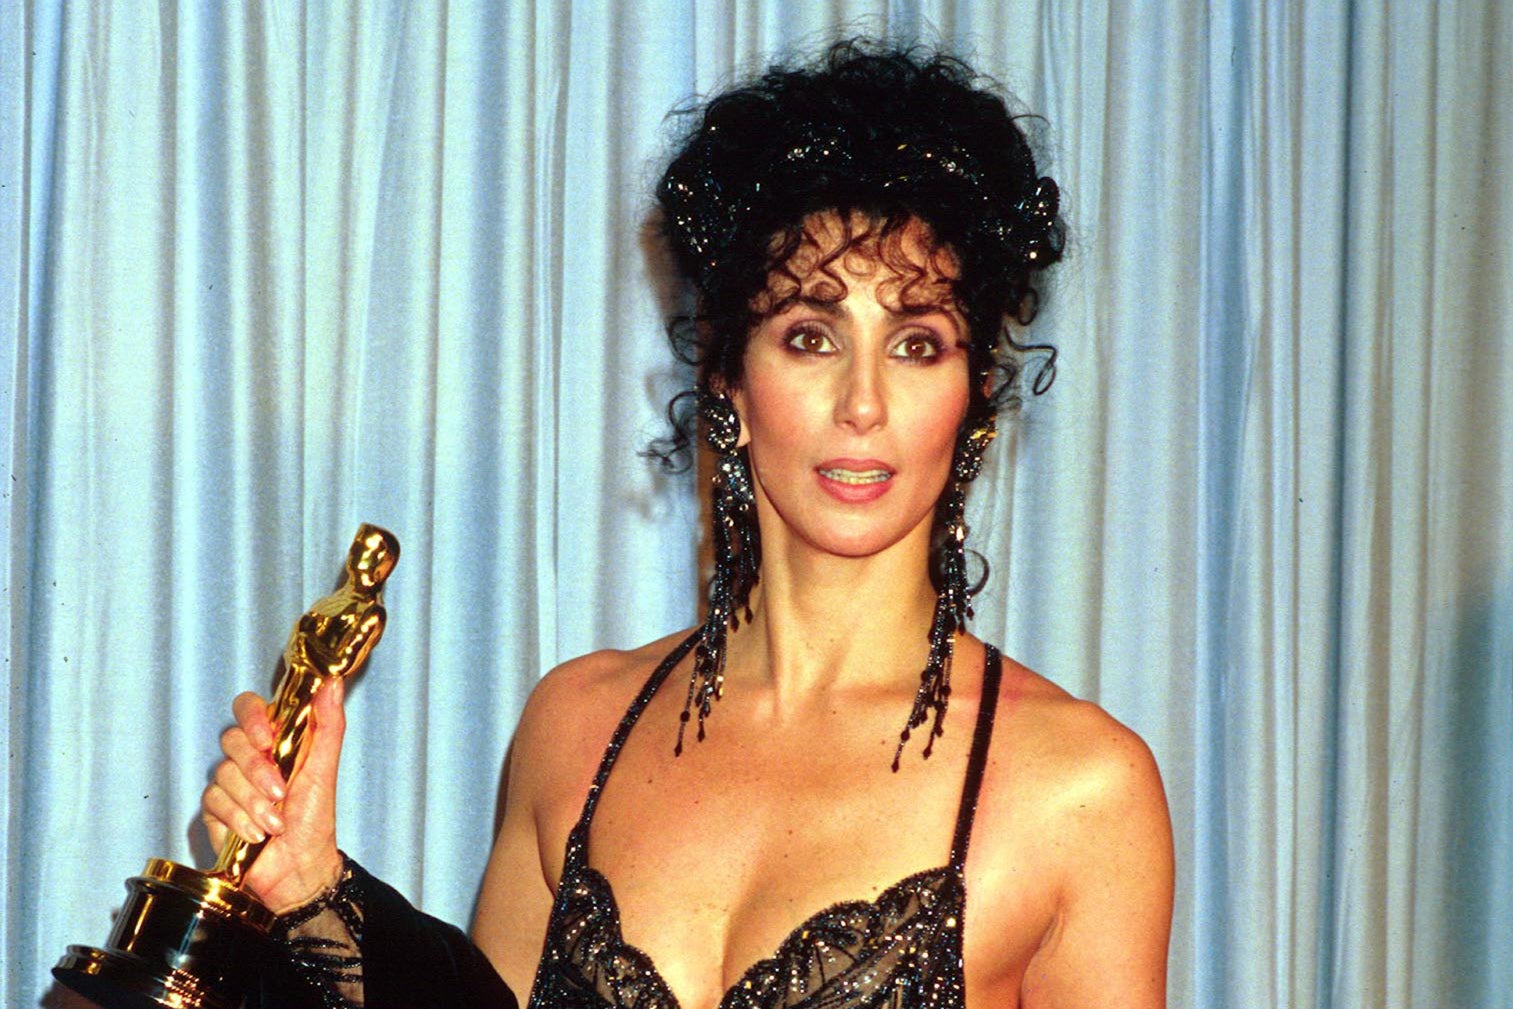 Cher collects her Oscar for ‘Moonstruck’ in 1988